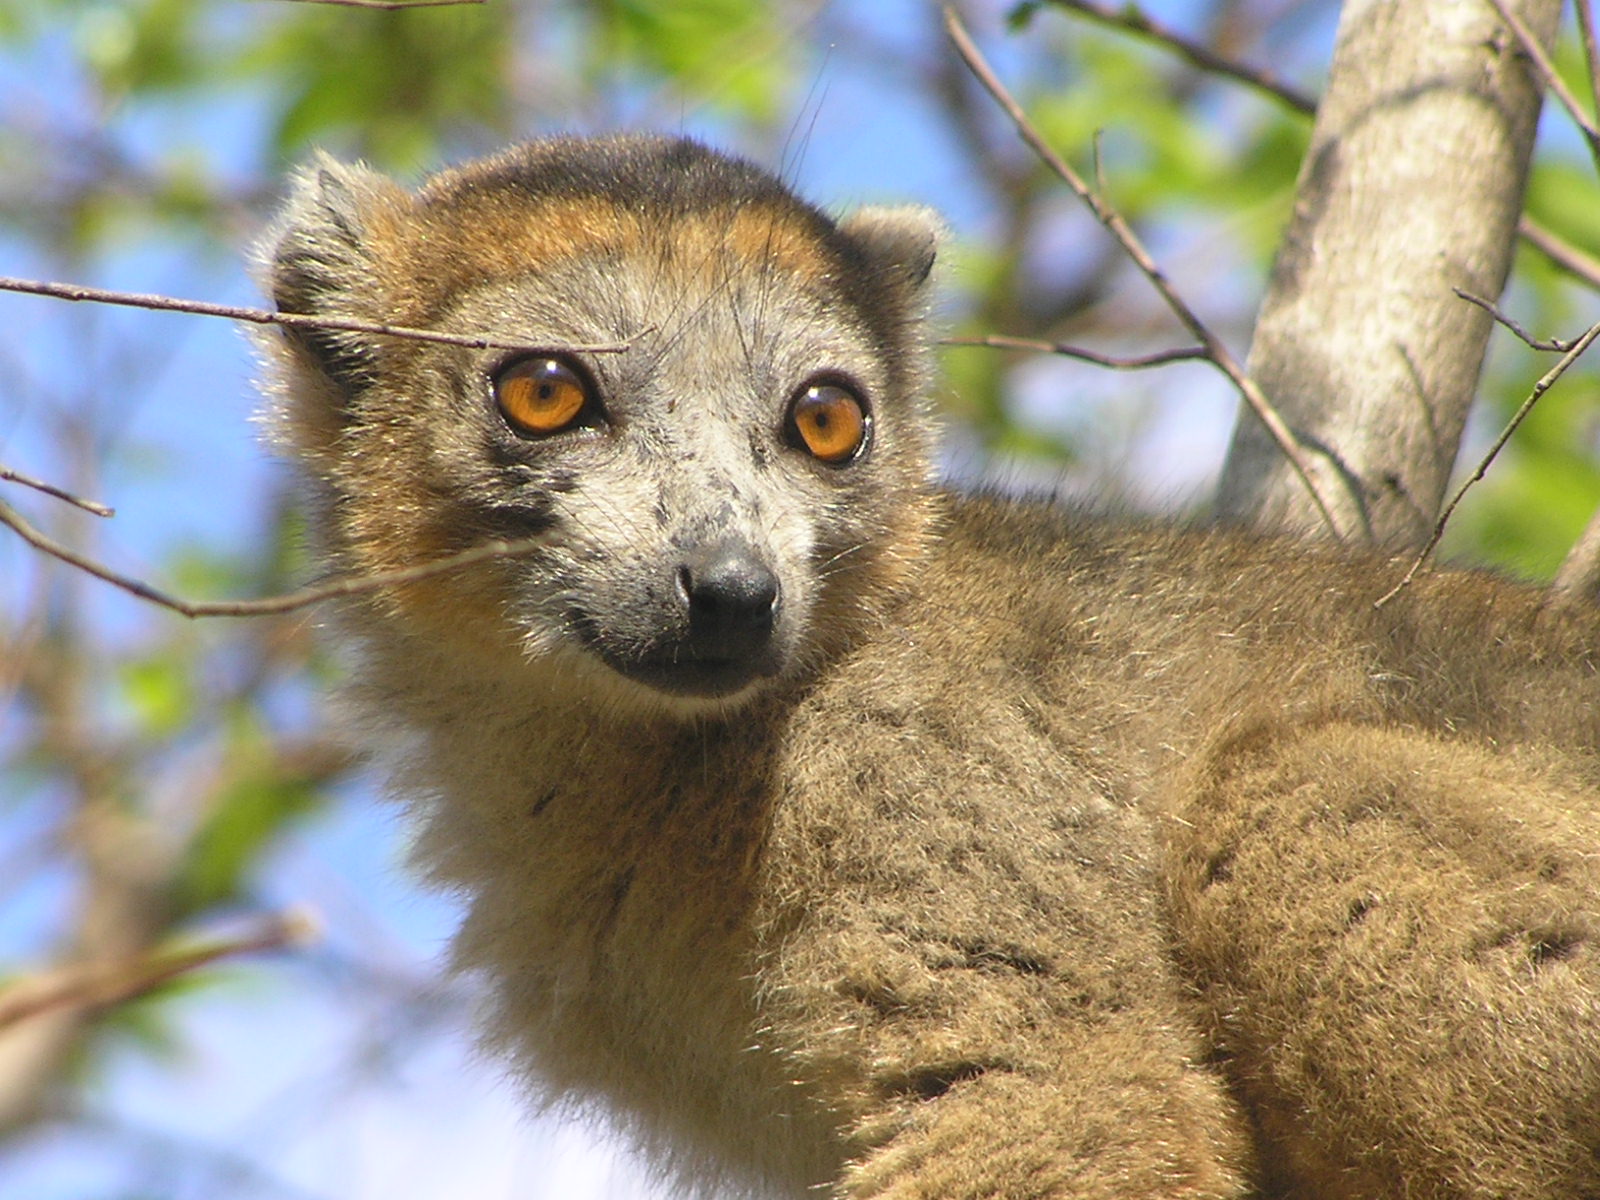 Crowned Lemur | Creatures of the World Wikia | FANDOM powered by Wikia